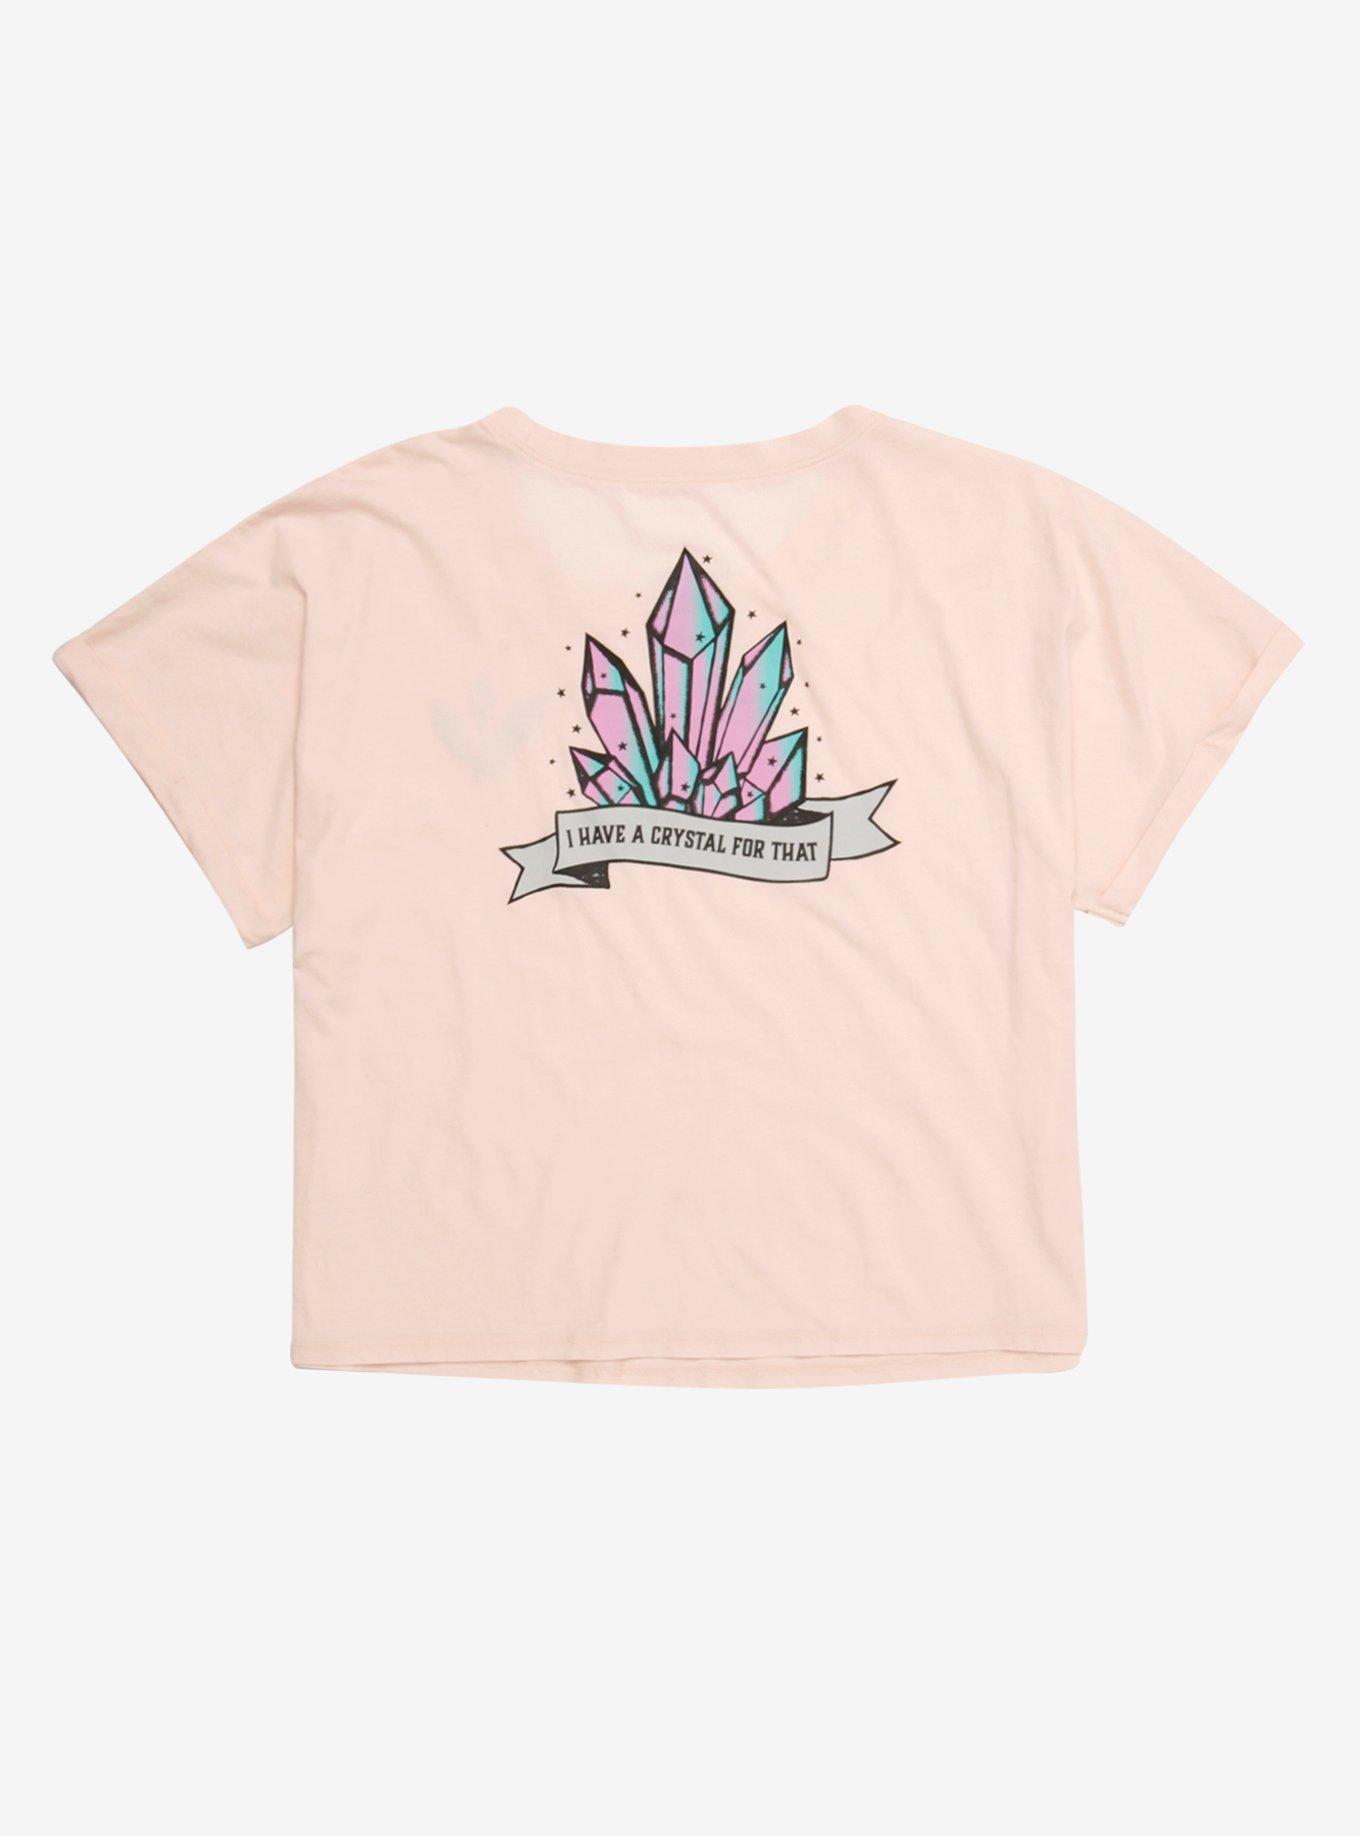 I Have A Crystal For That Girls Crop T-Shirt Plus Size, BLUE, hi-res